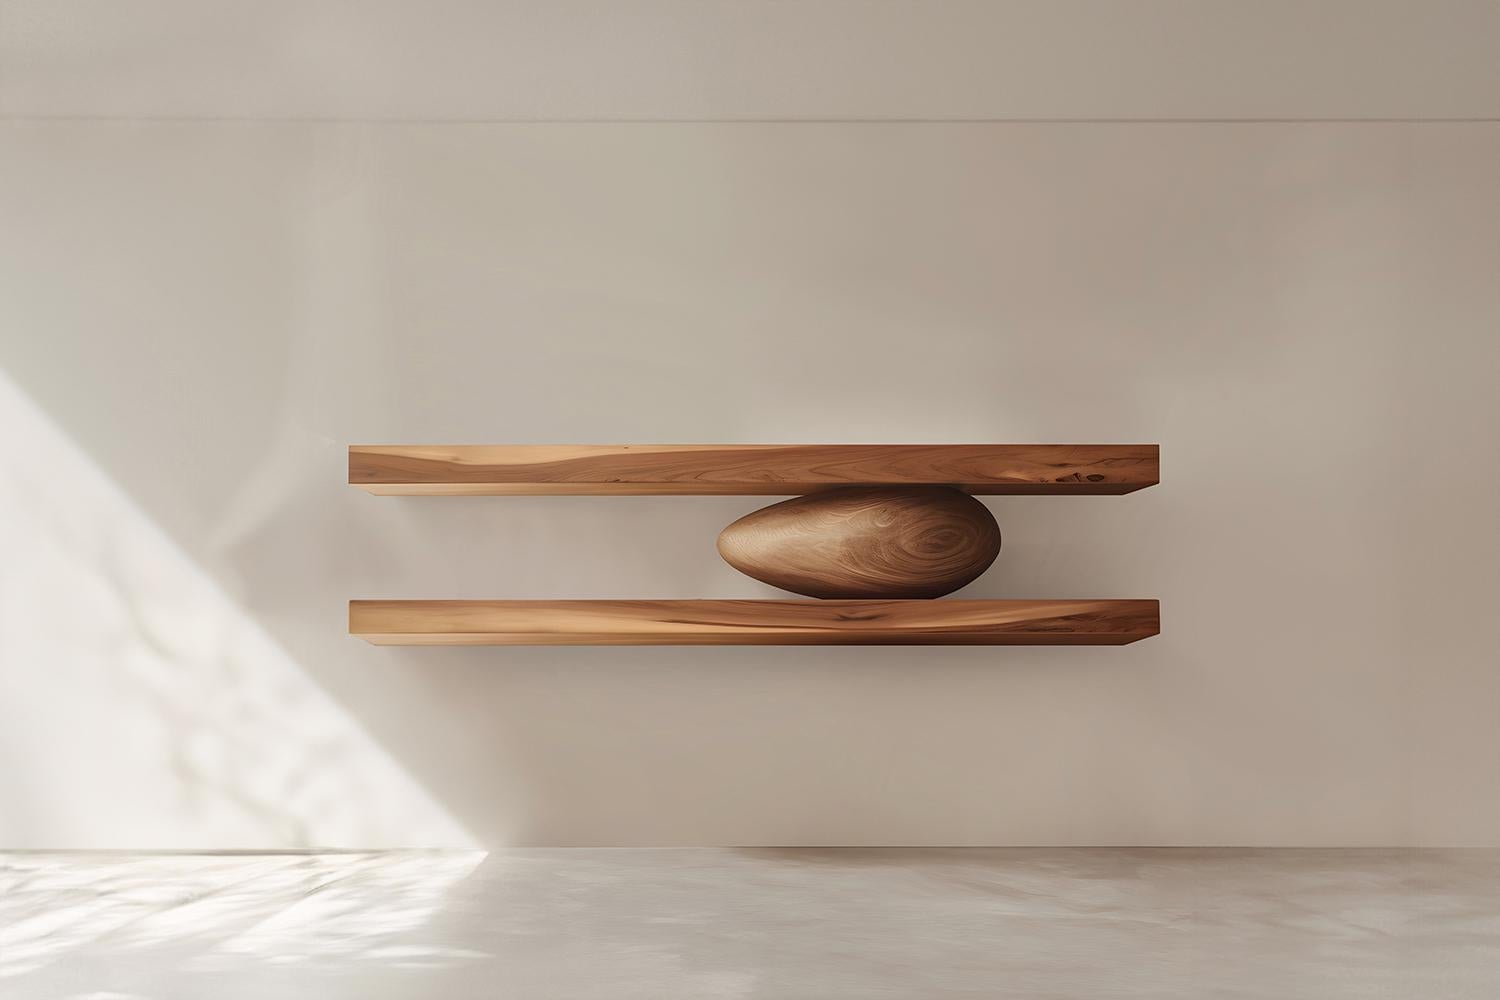 Set of Two Floating Shelves with One Sculptural Wooden Pebble Accent in the Middle, Sereno by Joel Escalona

—

What happens when the practical becomes art?
What happens when ornamentation gains significance?

Those were the questions Joel Escalona